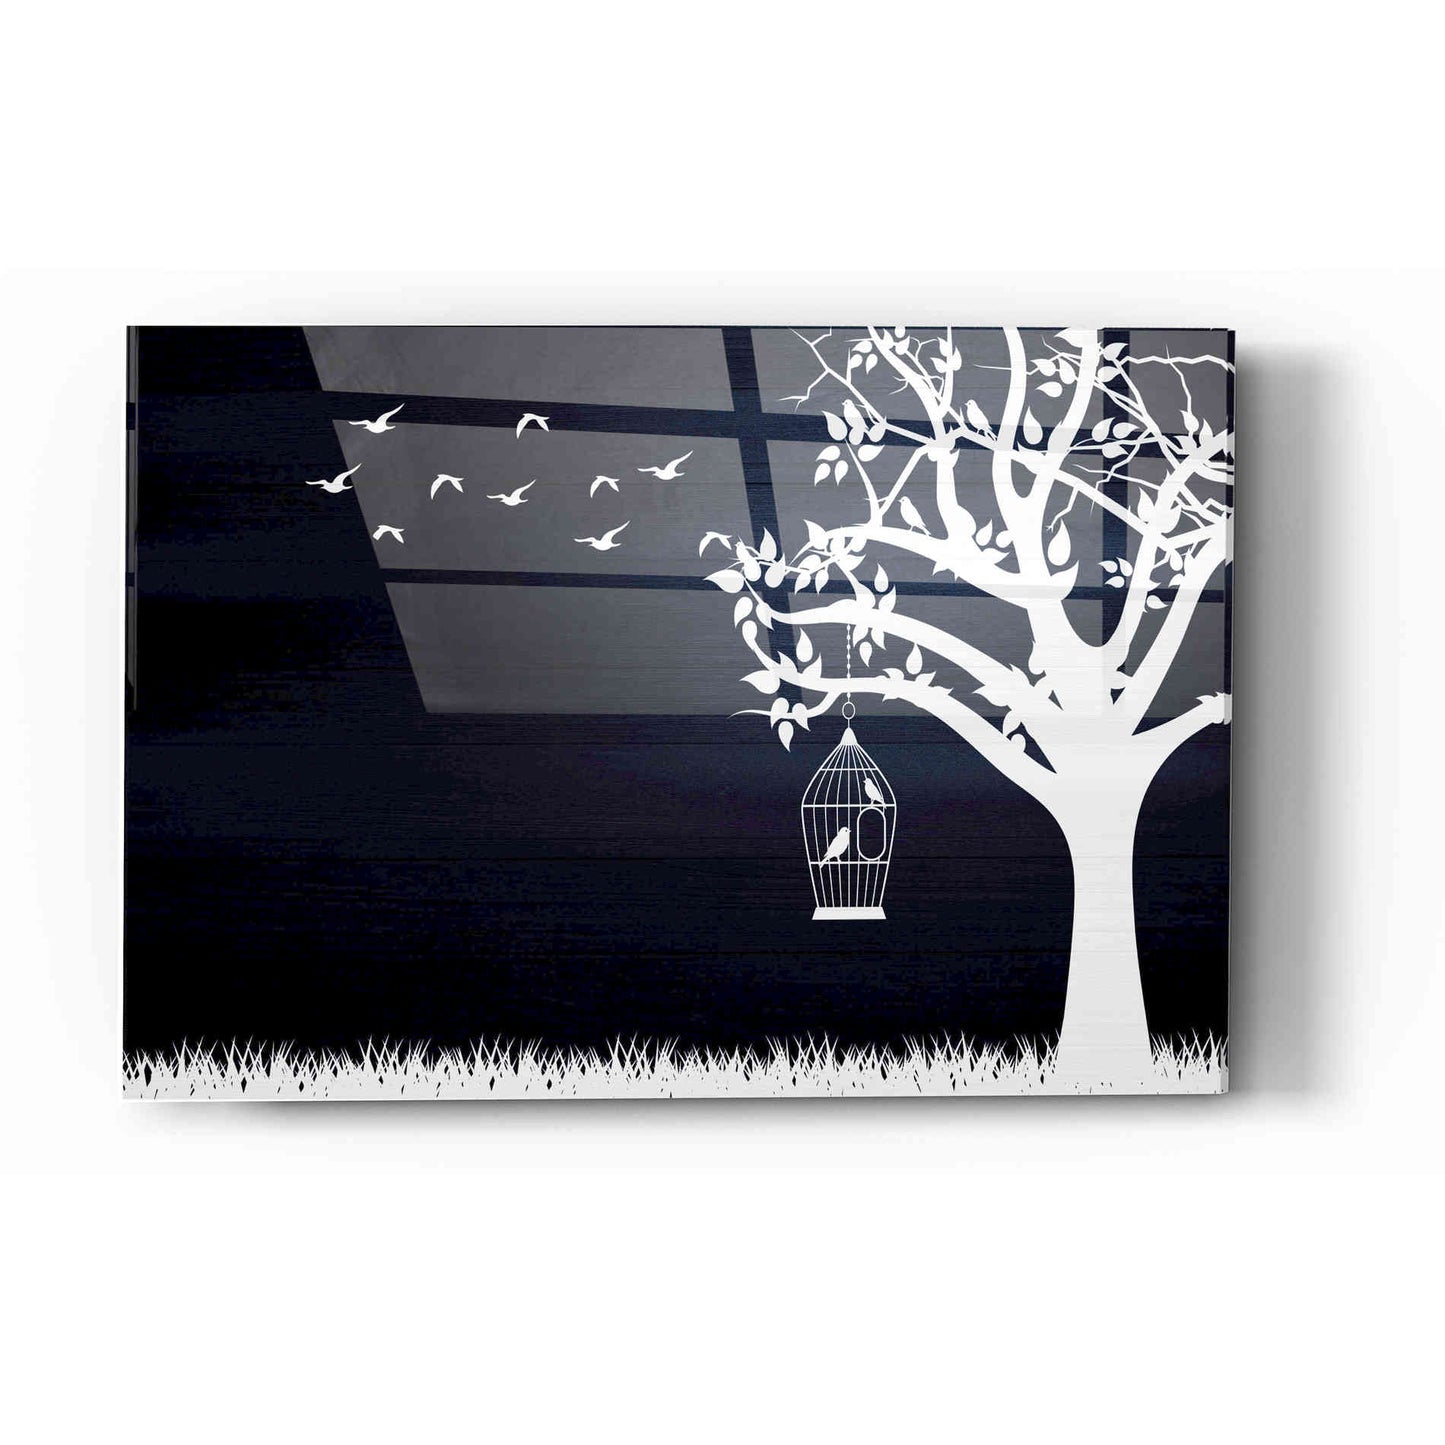 Epic Art "Wood Series: Birds and Tree, Inverted Silhouettes" Acrylic Glass Wall Art,12x16